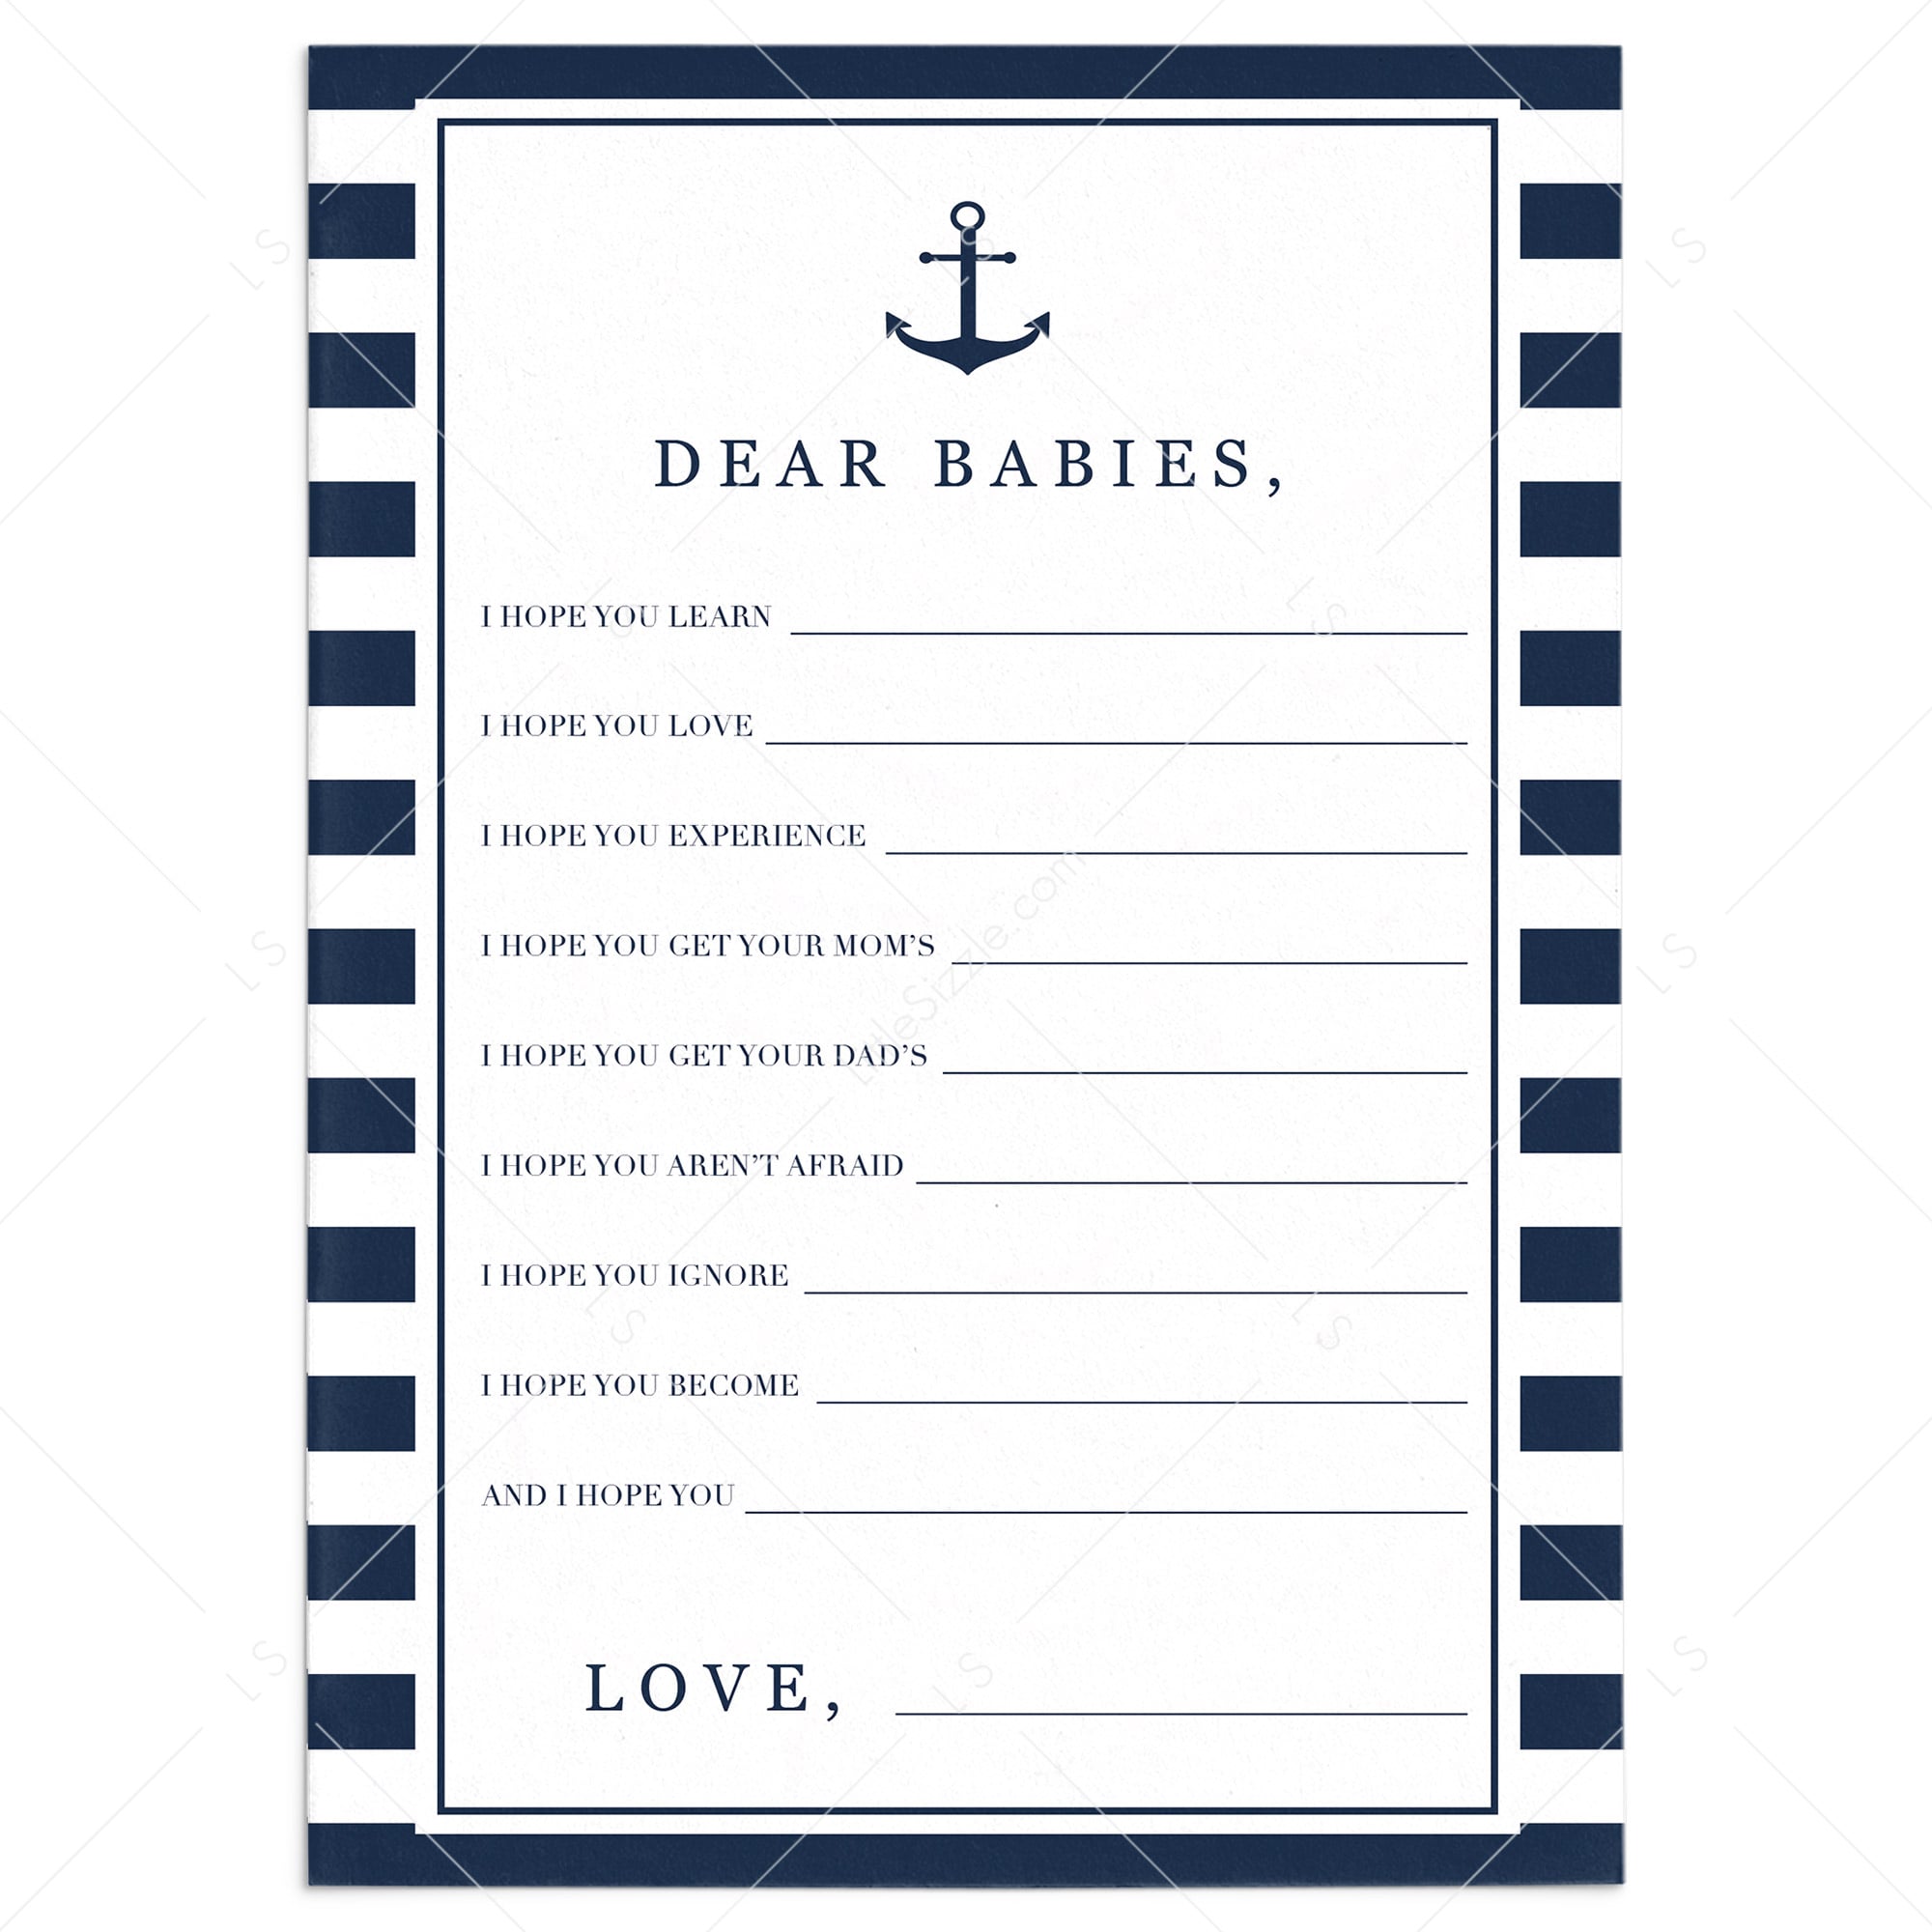 Dear Babies Wishes for Baby Cards Nautical by LittleSizzle